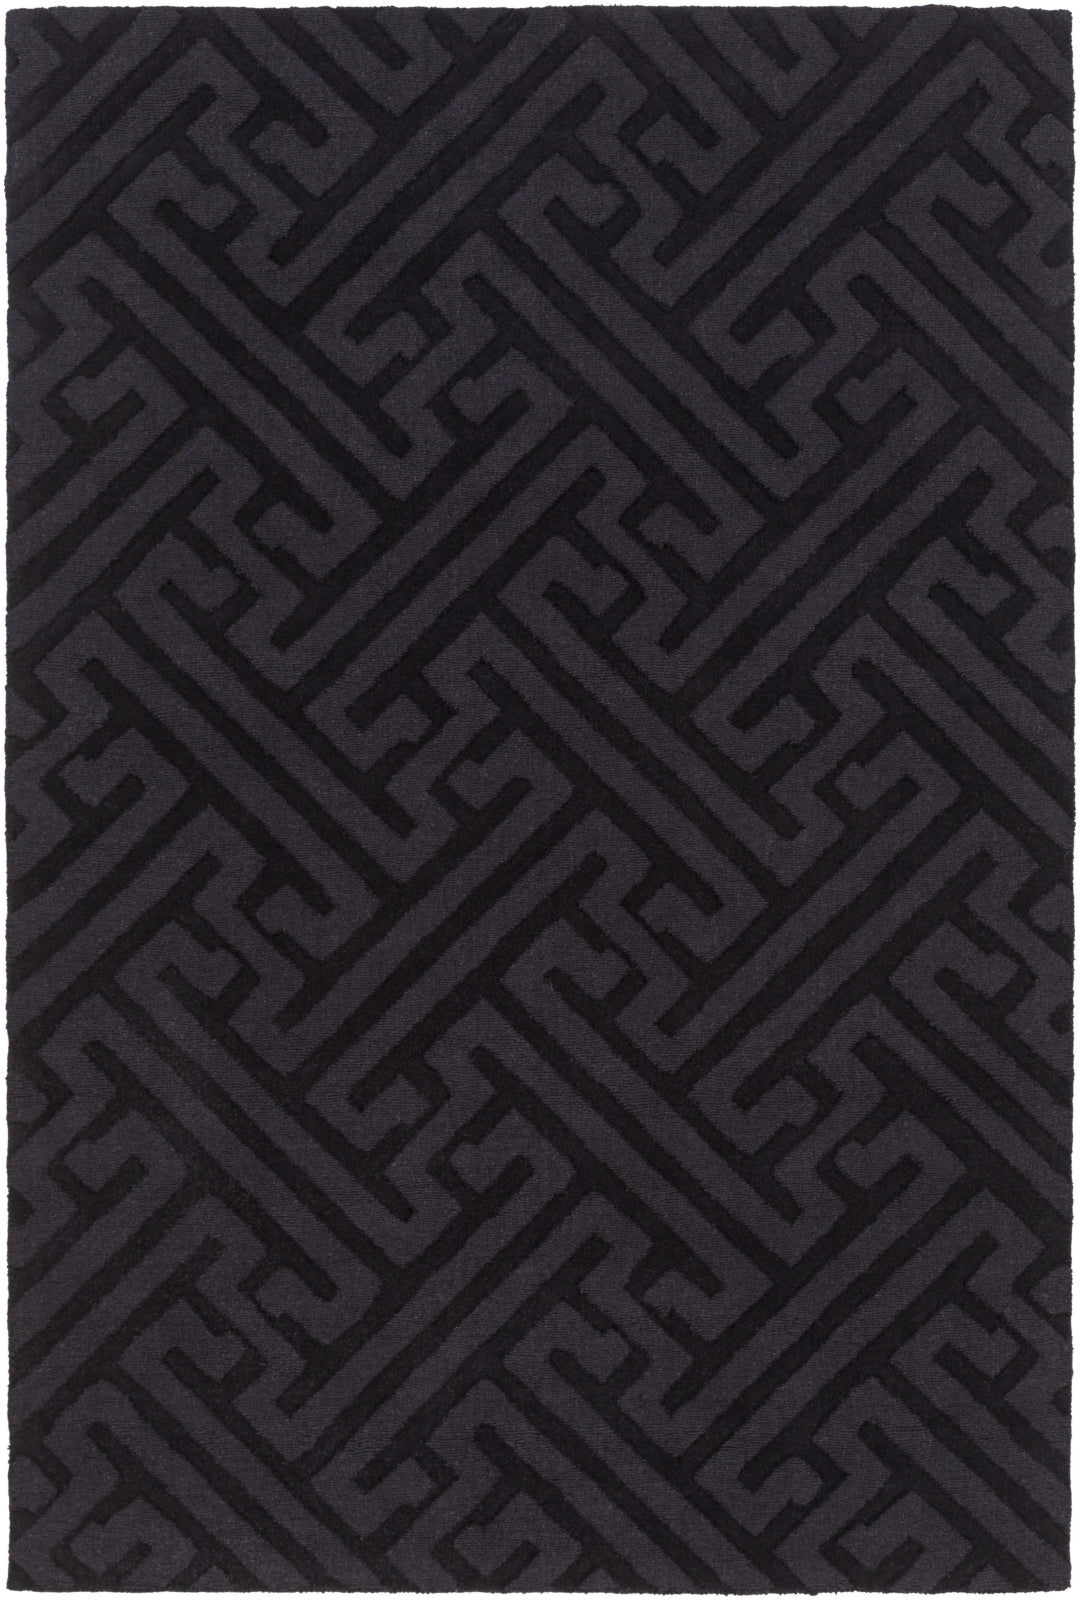 Surya The Oakes OAK-6009 Area Rug by Florence Broadhurst